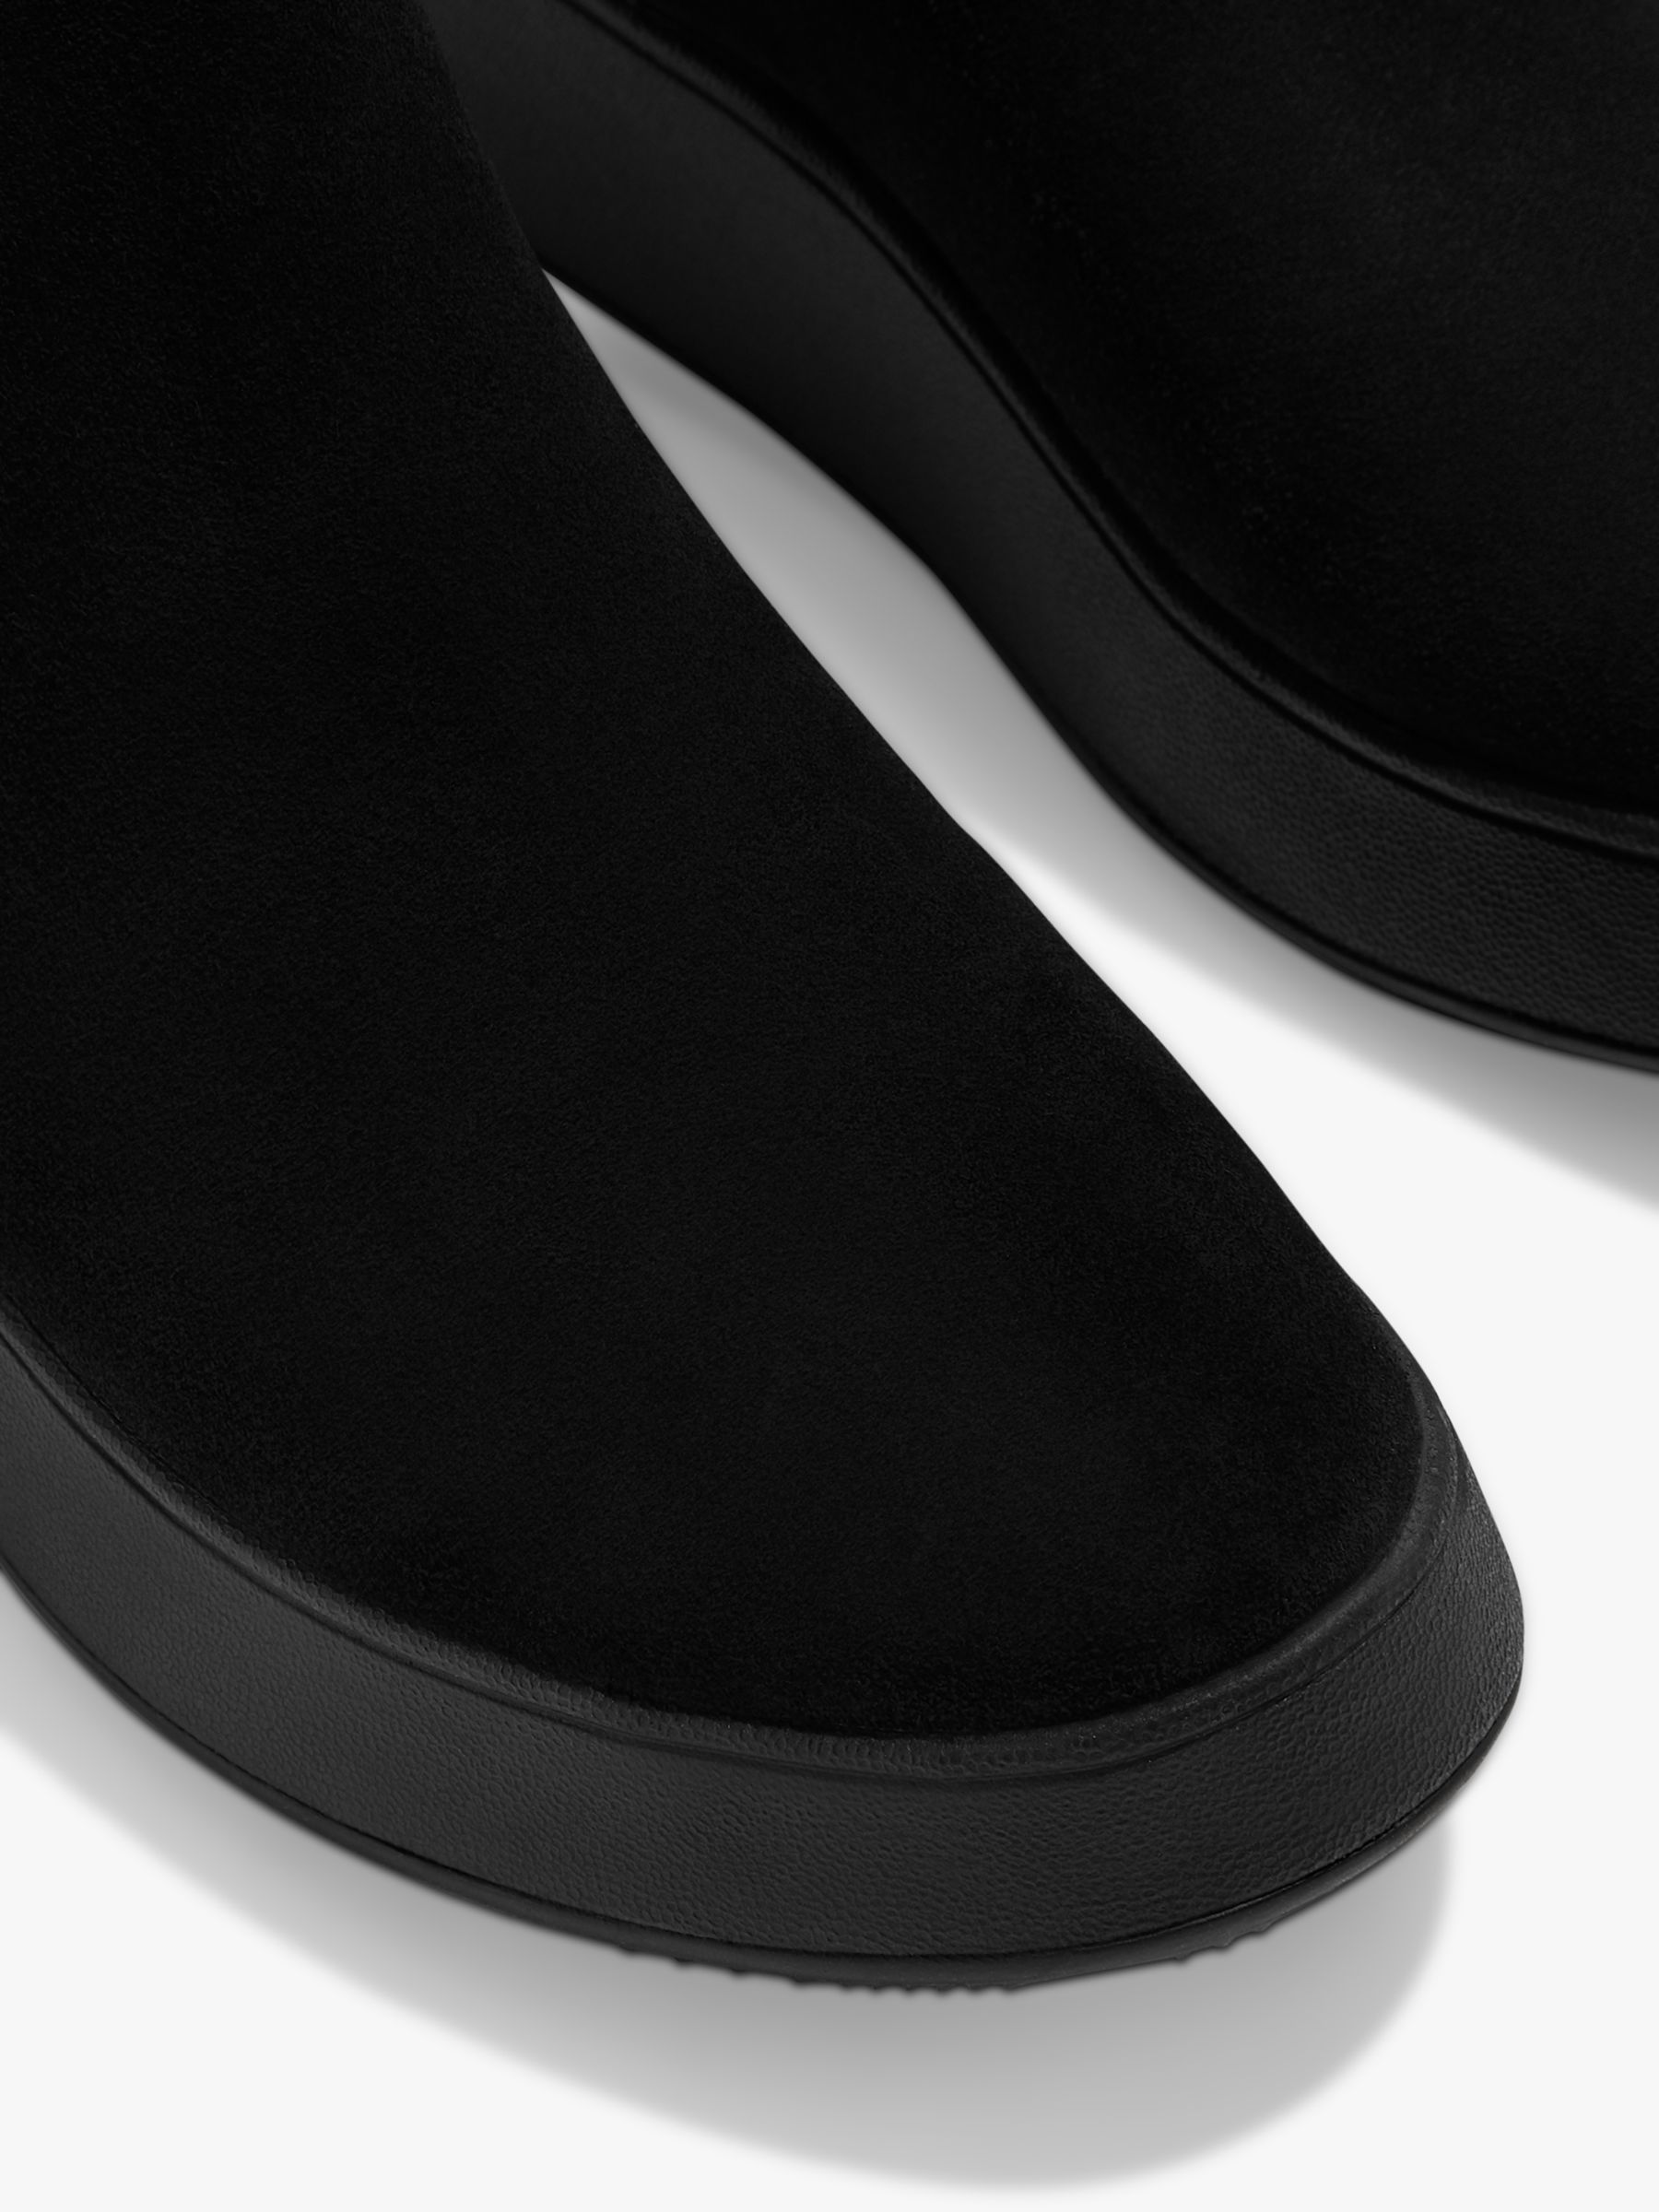 FitFlop Suede Flatform Chelsea Boots, All Black at John Lewis & Partners